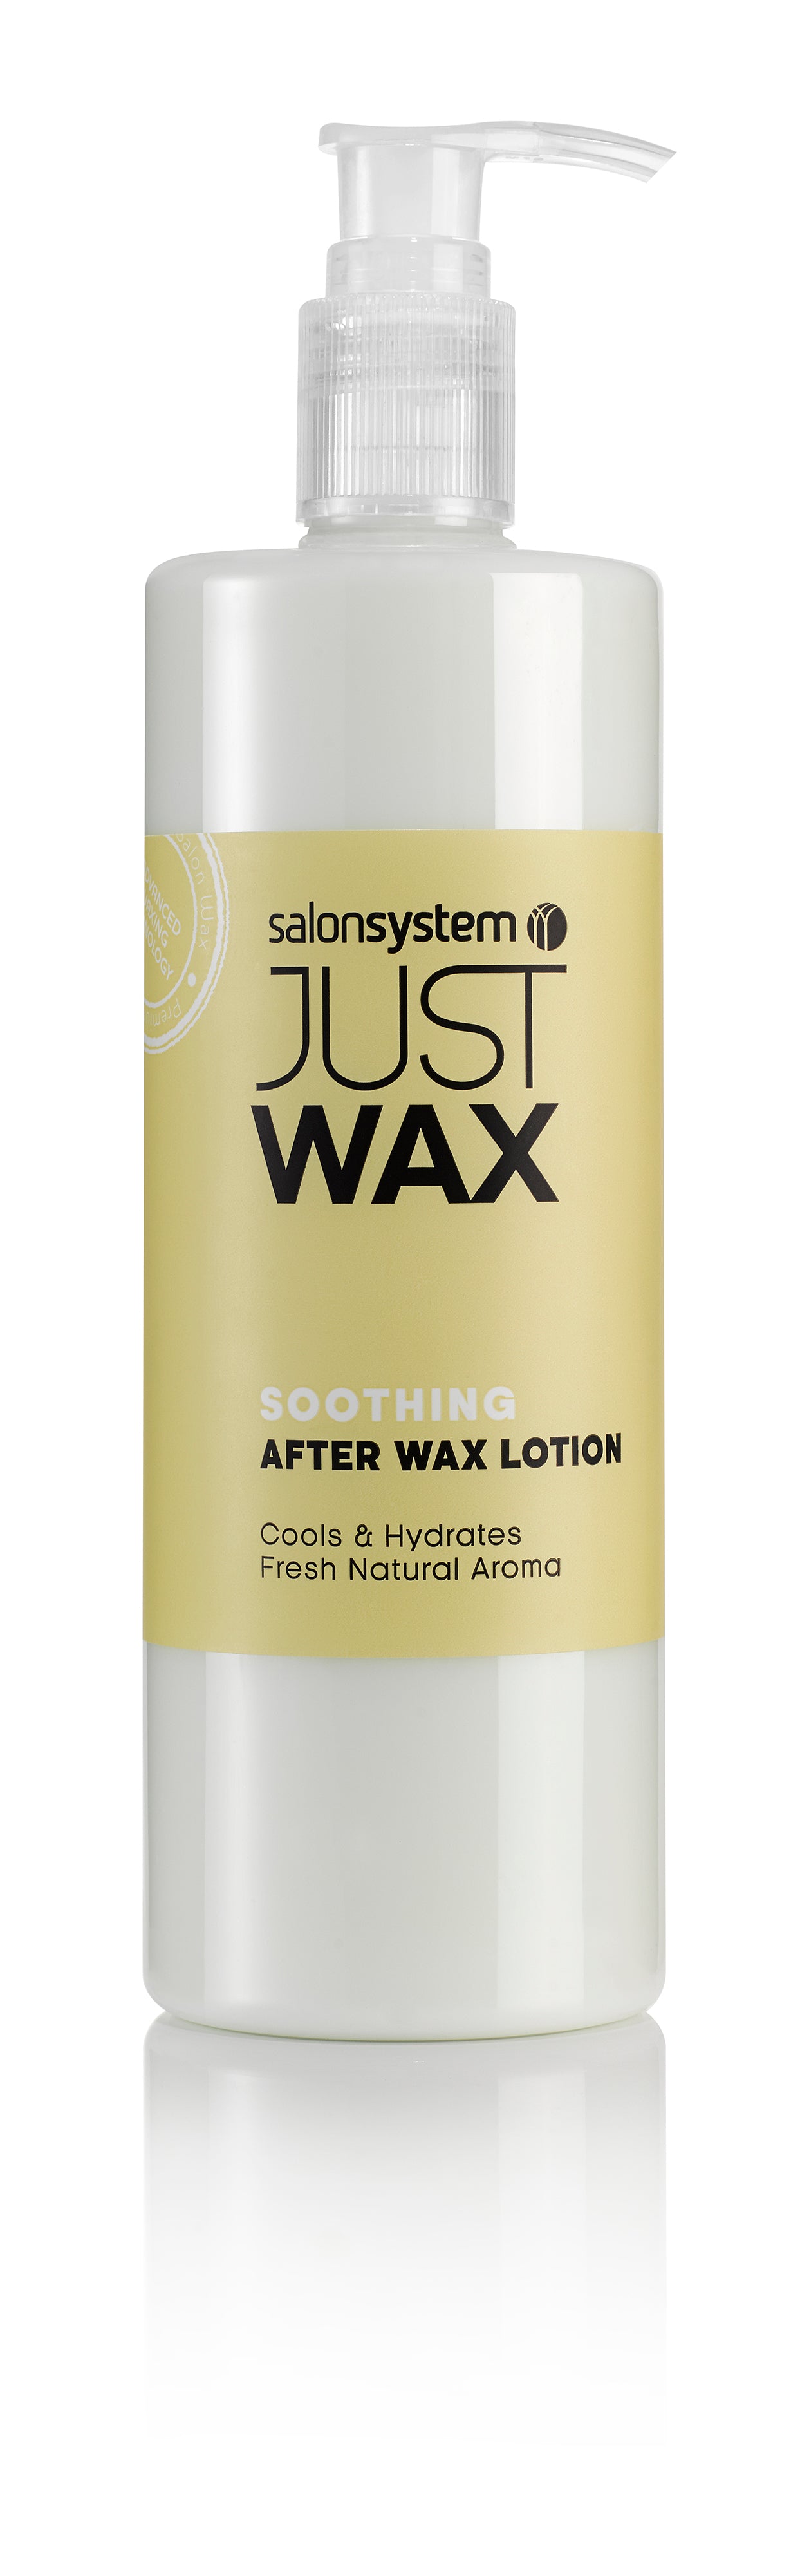 Just Wax - Soothing After Wax lotion 500ml